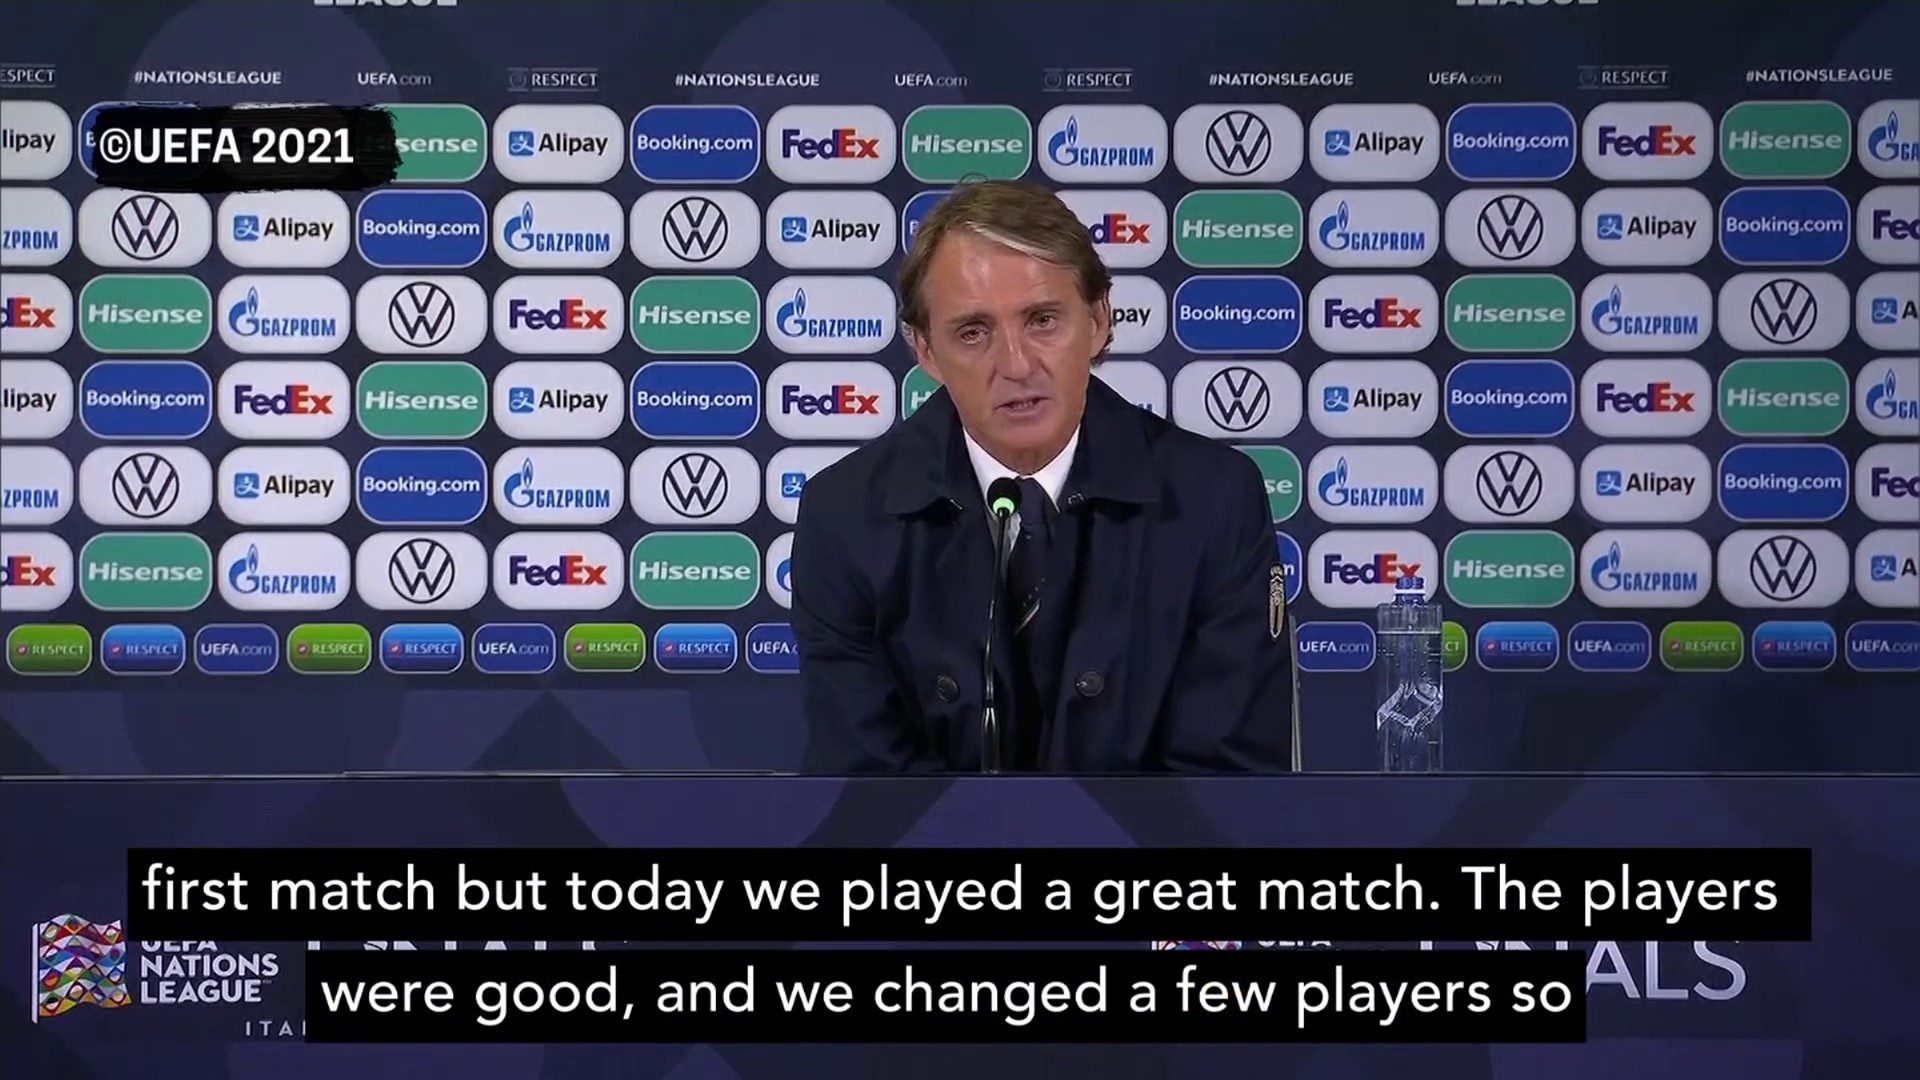 Mancini: "We made some changes and the team played a good match"